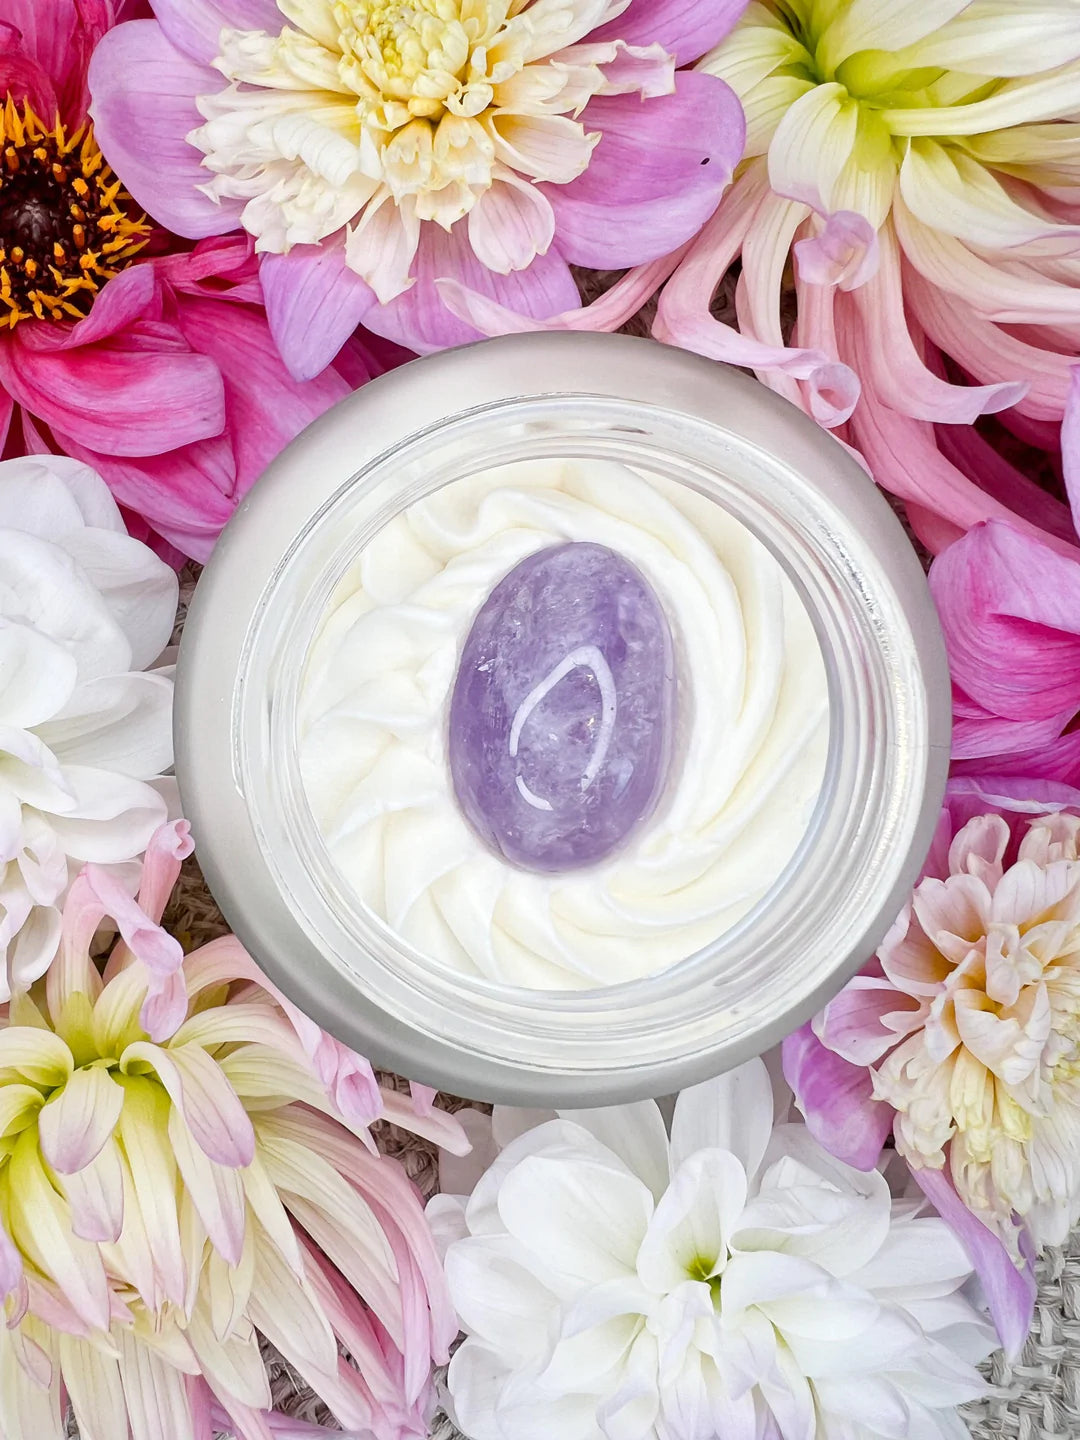 Whipped Body Butter Topped with an Amethyst Crystal | Moonlight Scent